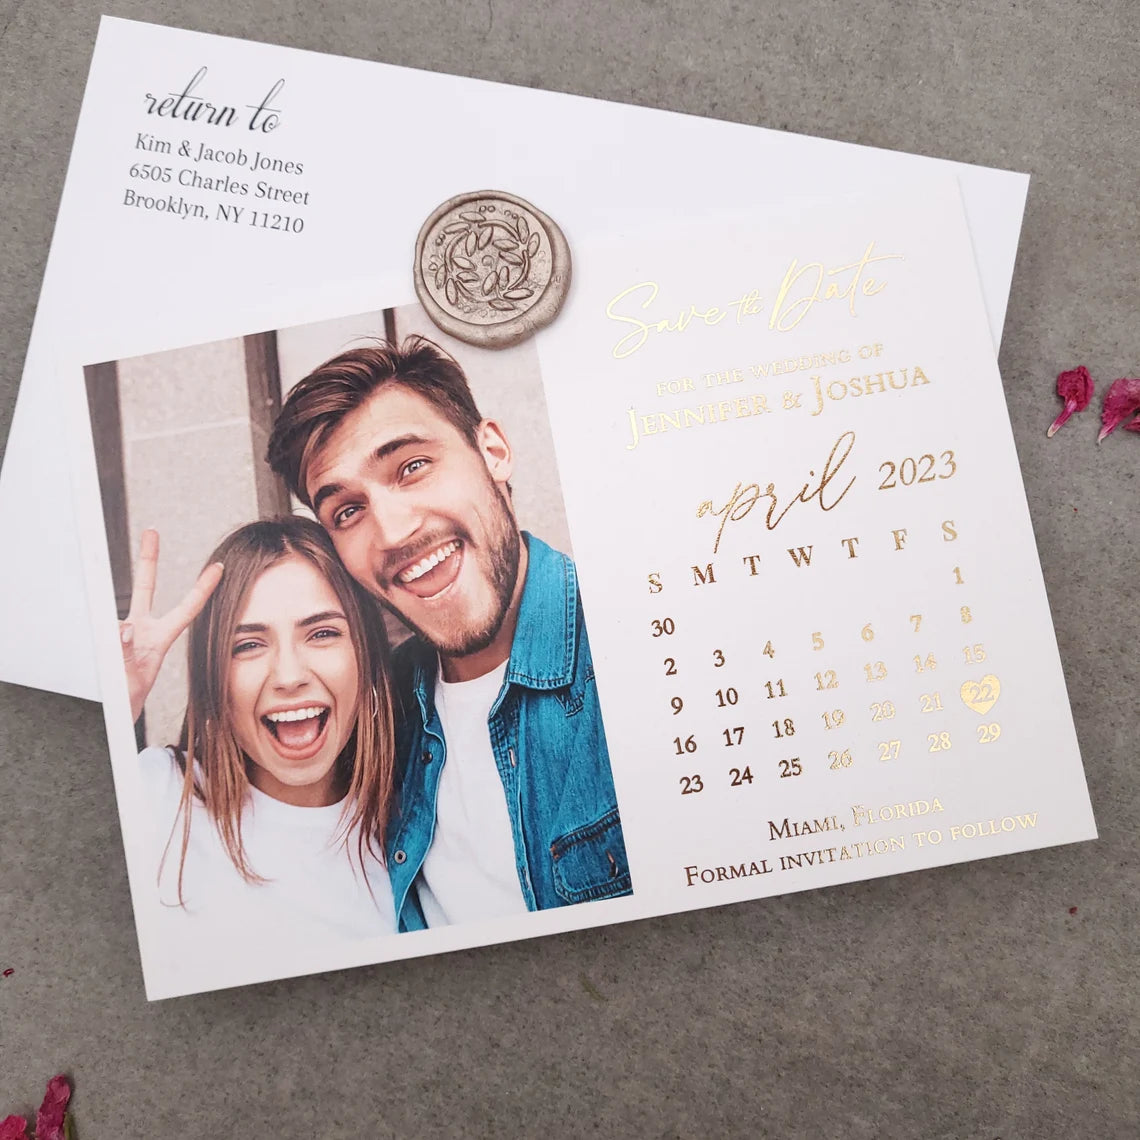 gold foiled photo save the date card with calendar design - XOXOKristen